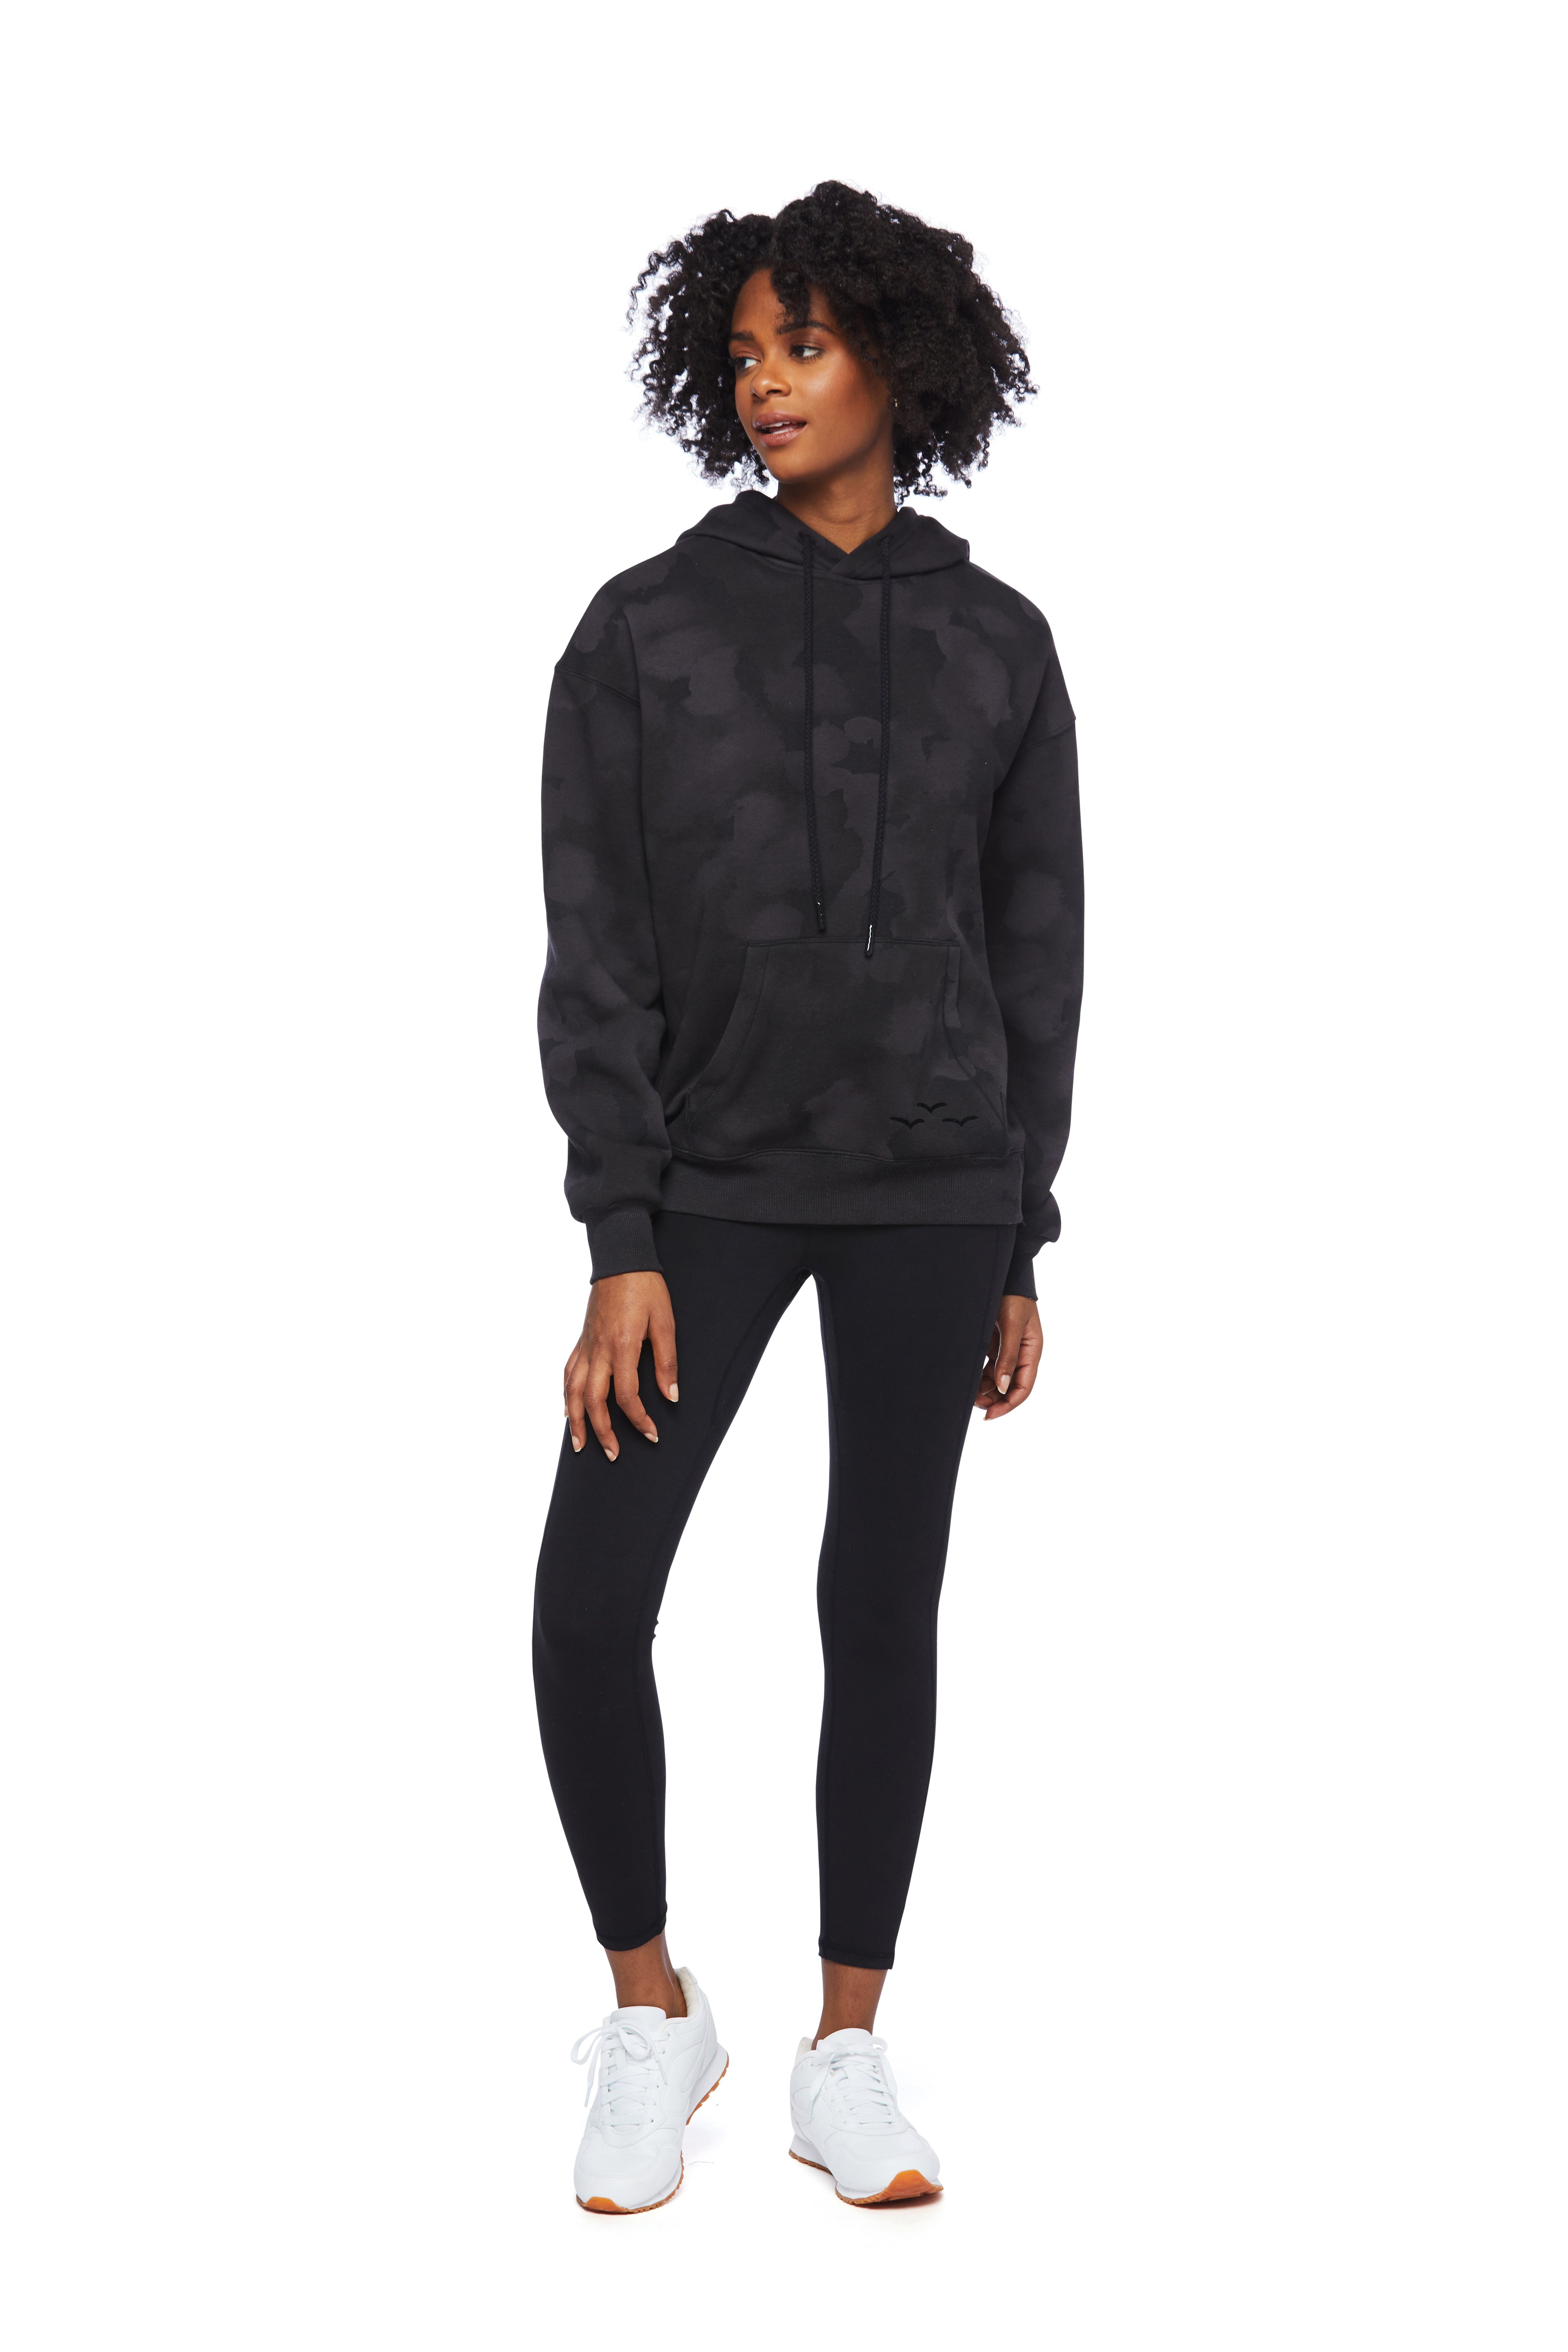 Chloe Relaxed Fit Hoodie in Black Sponge from Lazypants - always a great buy at a reasonable price.